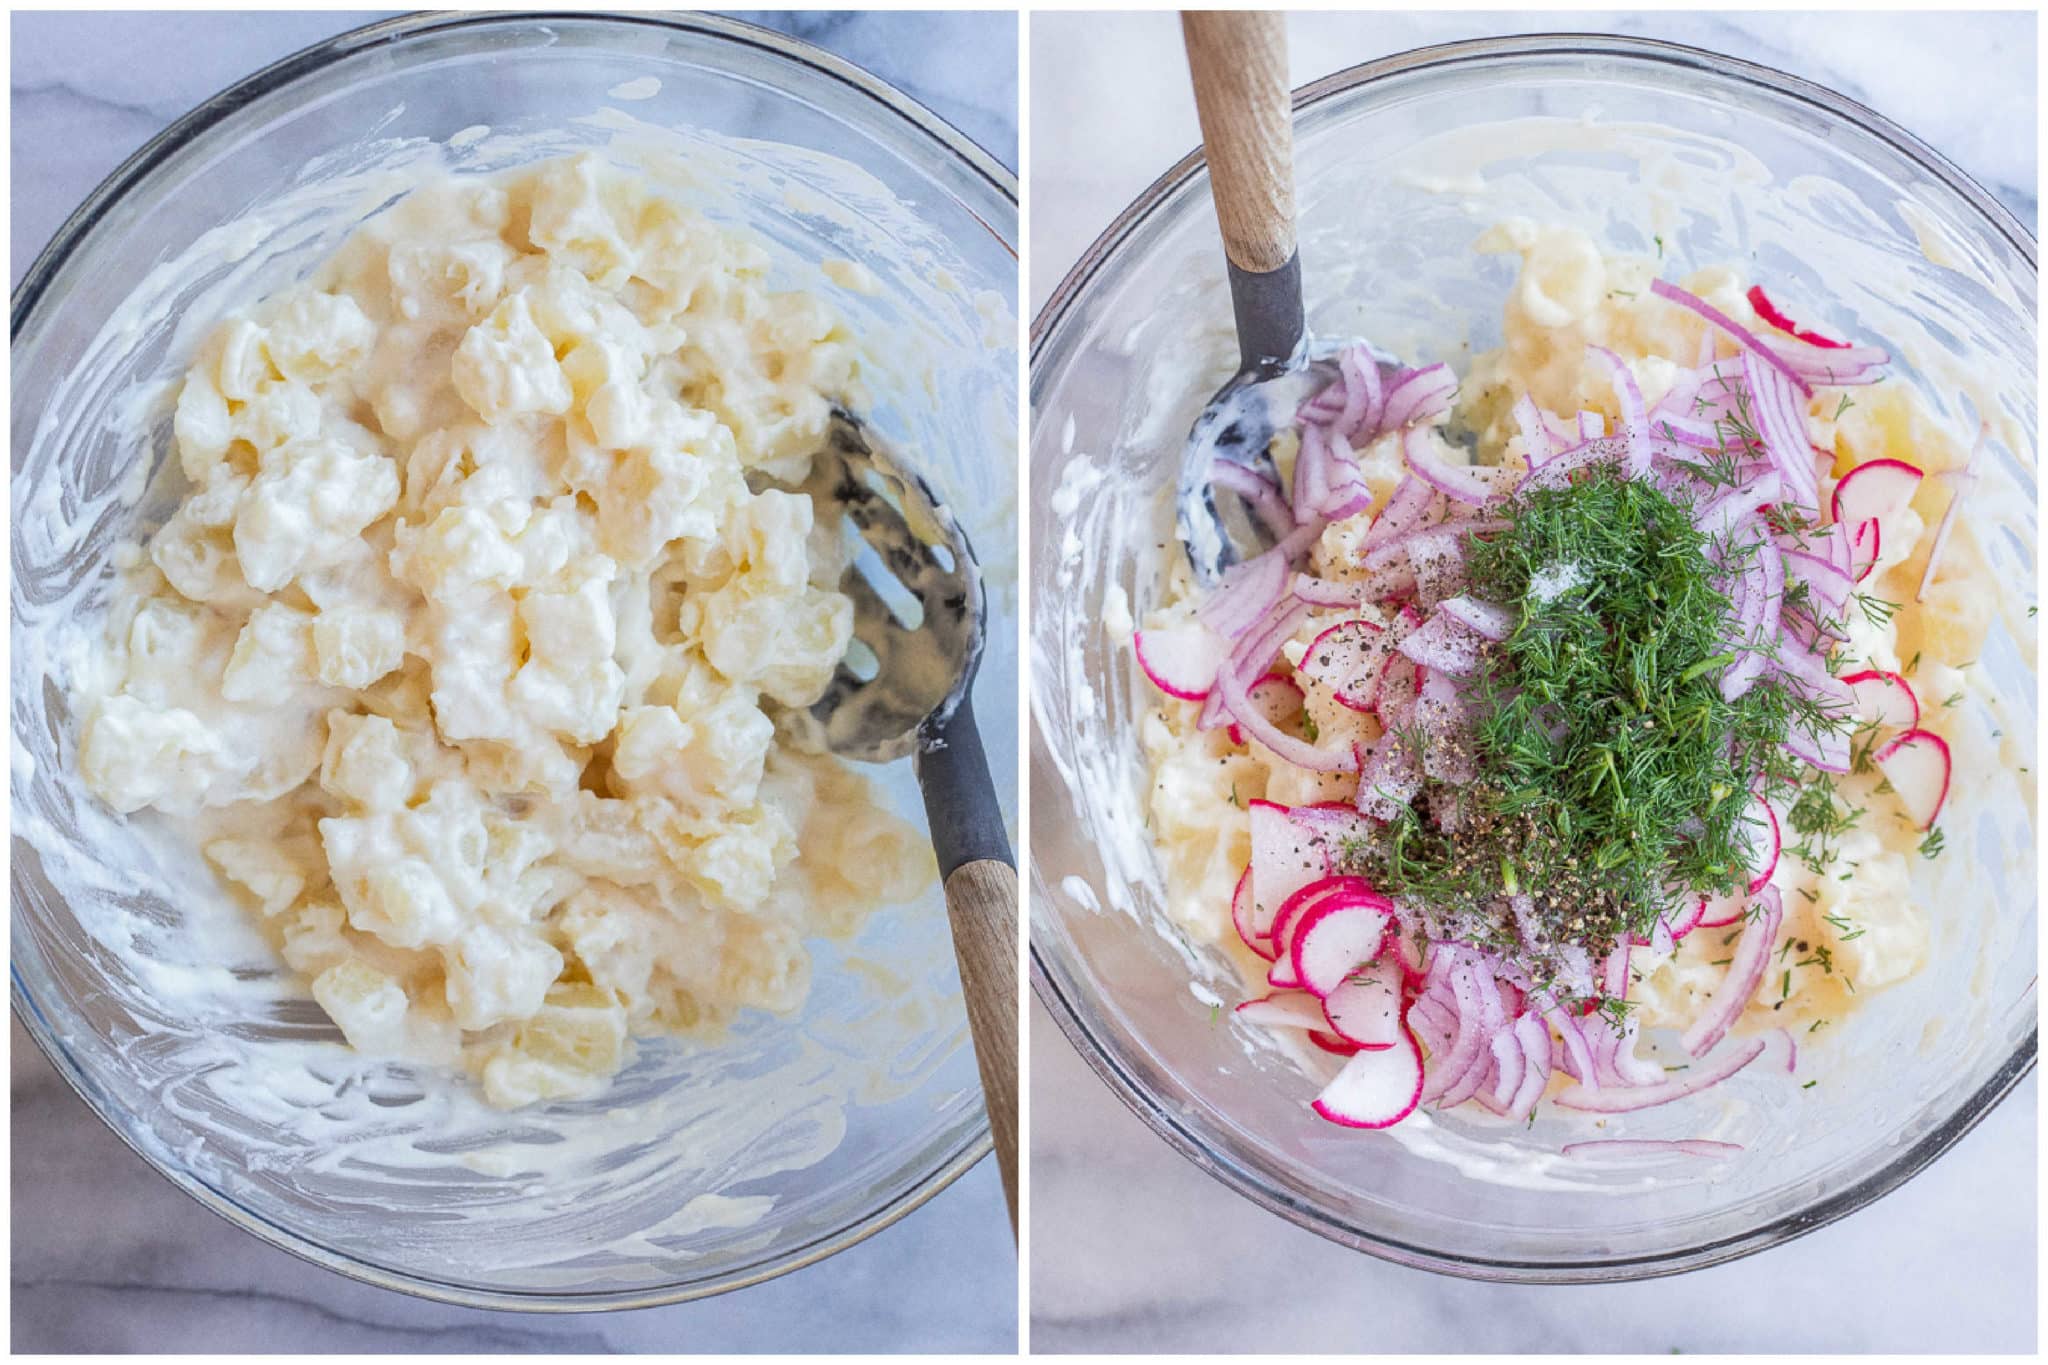 Shows how to make a salt and vinegar potato salad recipe by mixing all the ingredients together